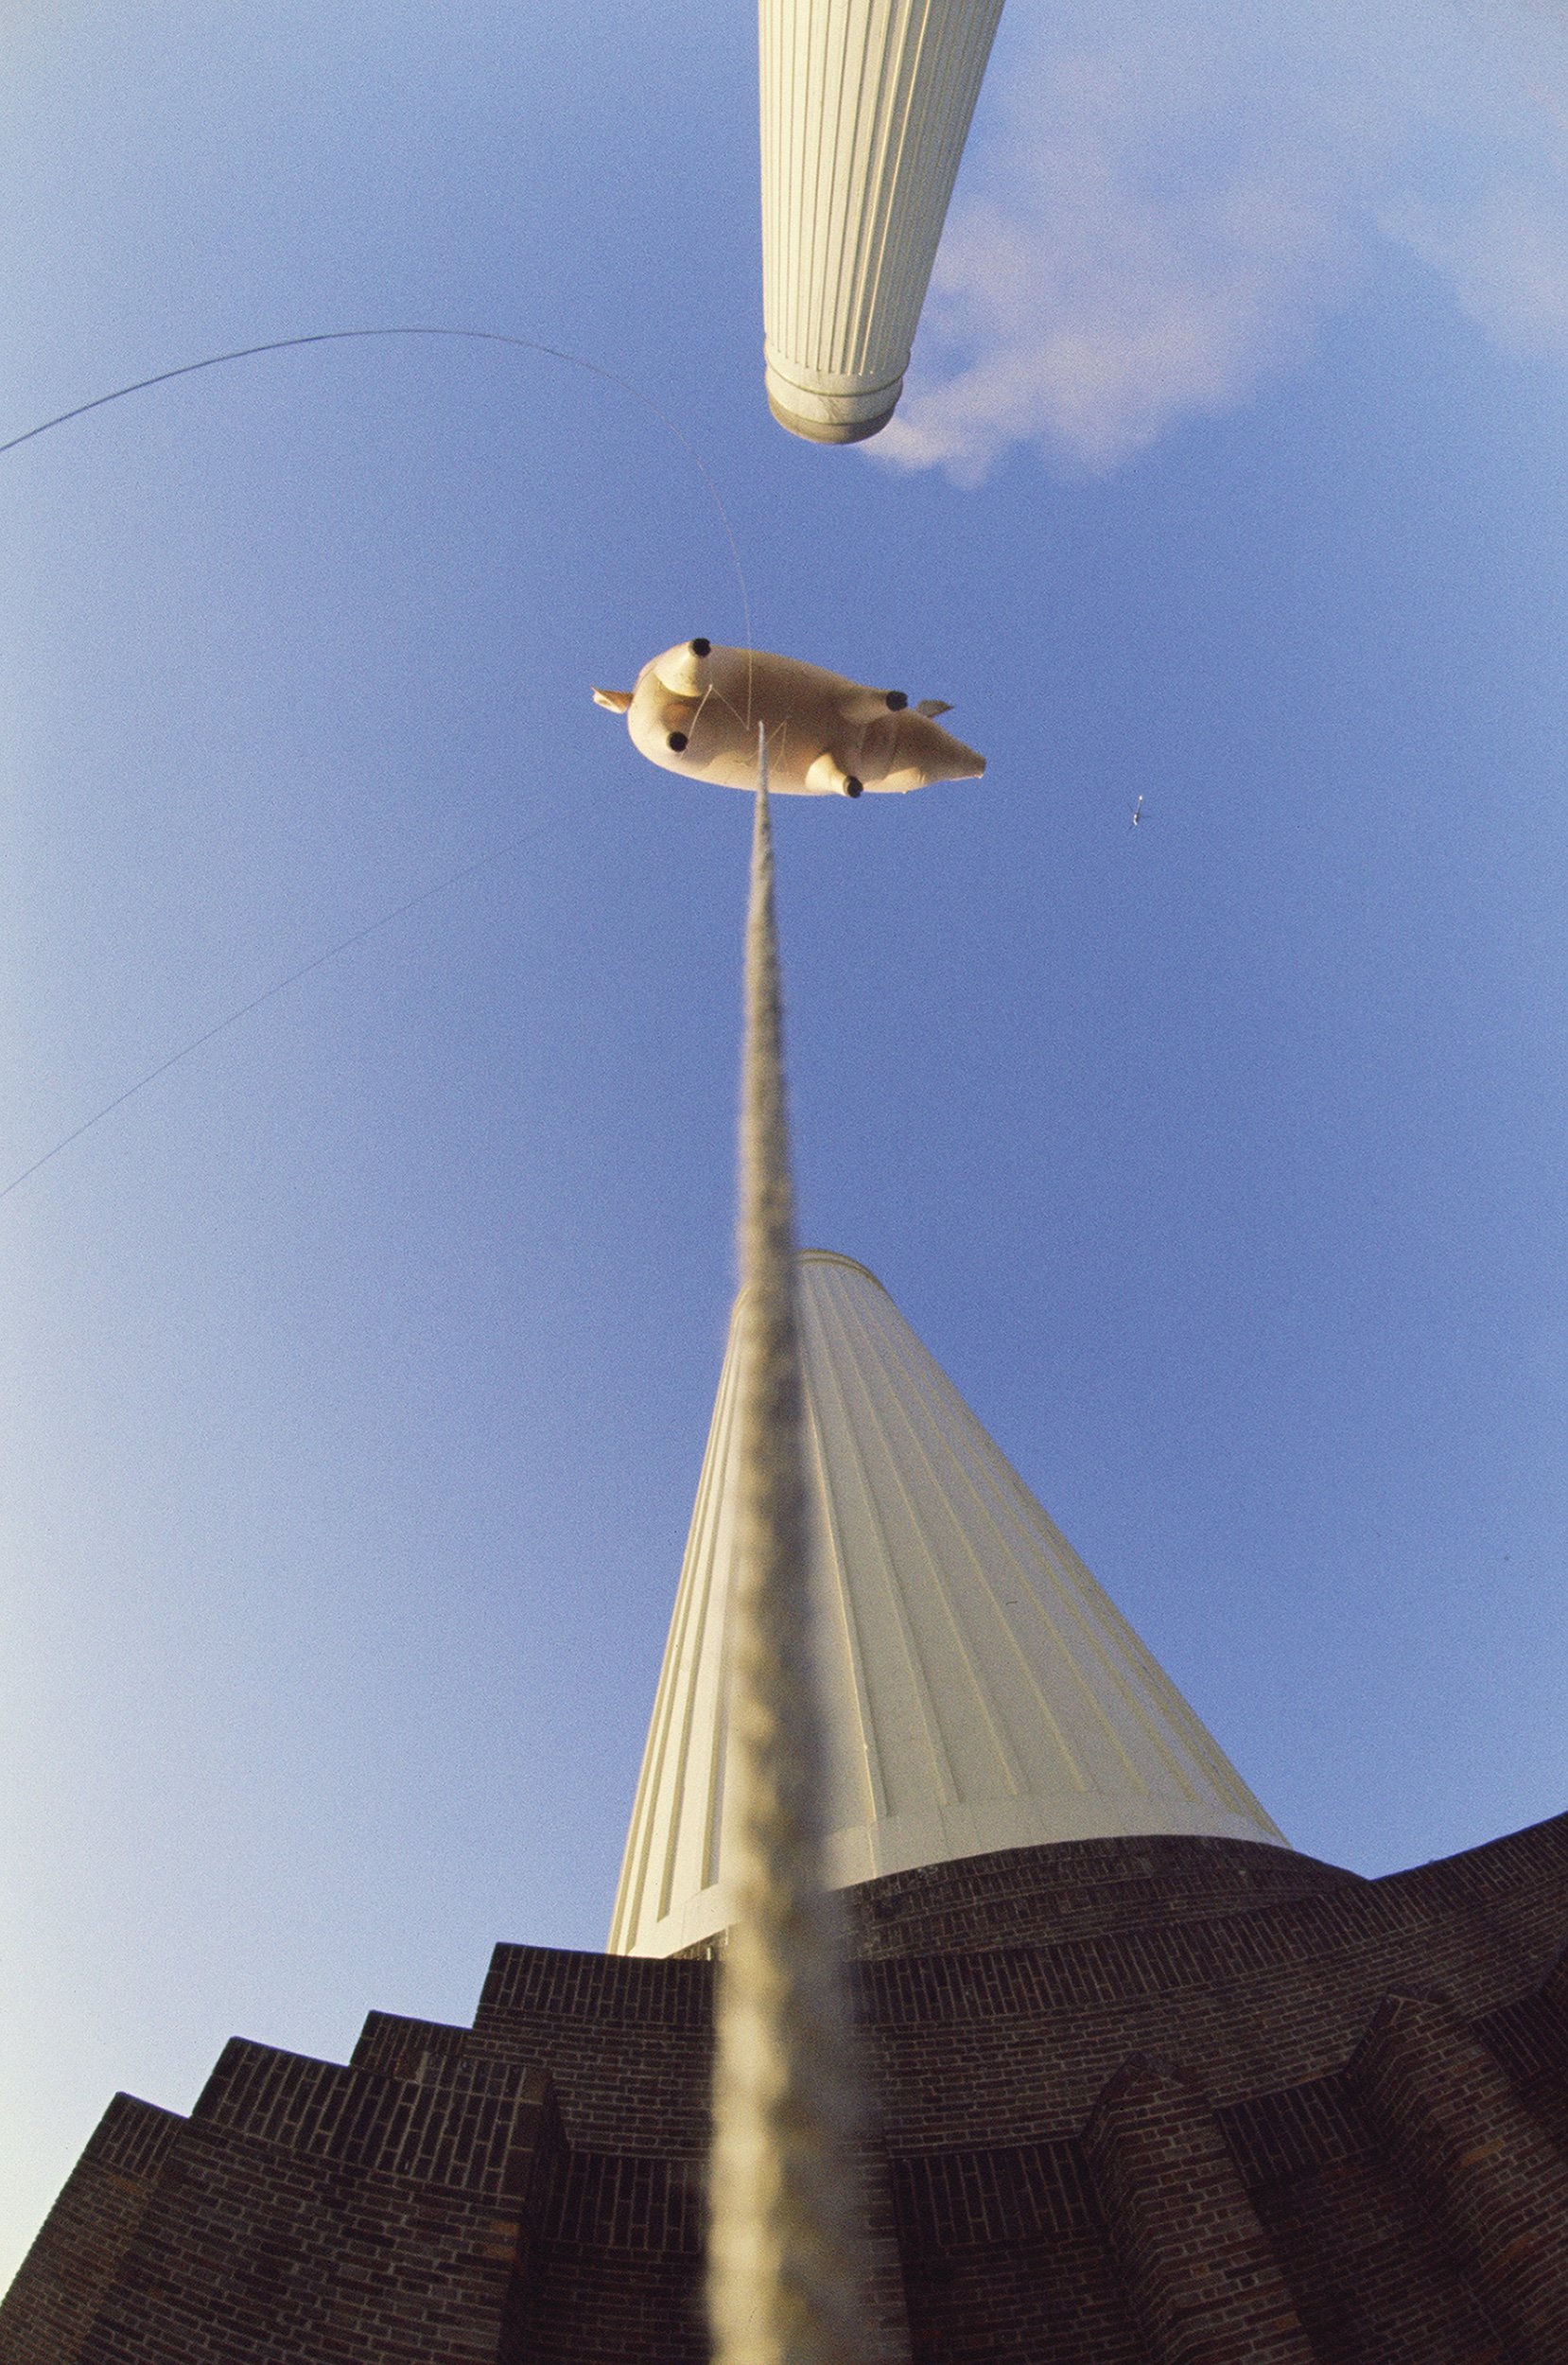 photograph taken from below of the tethered pig floating between the two large chimneys at battersea power station 1976 (c) pink floyd music ltd.jpeg